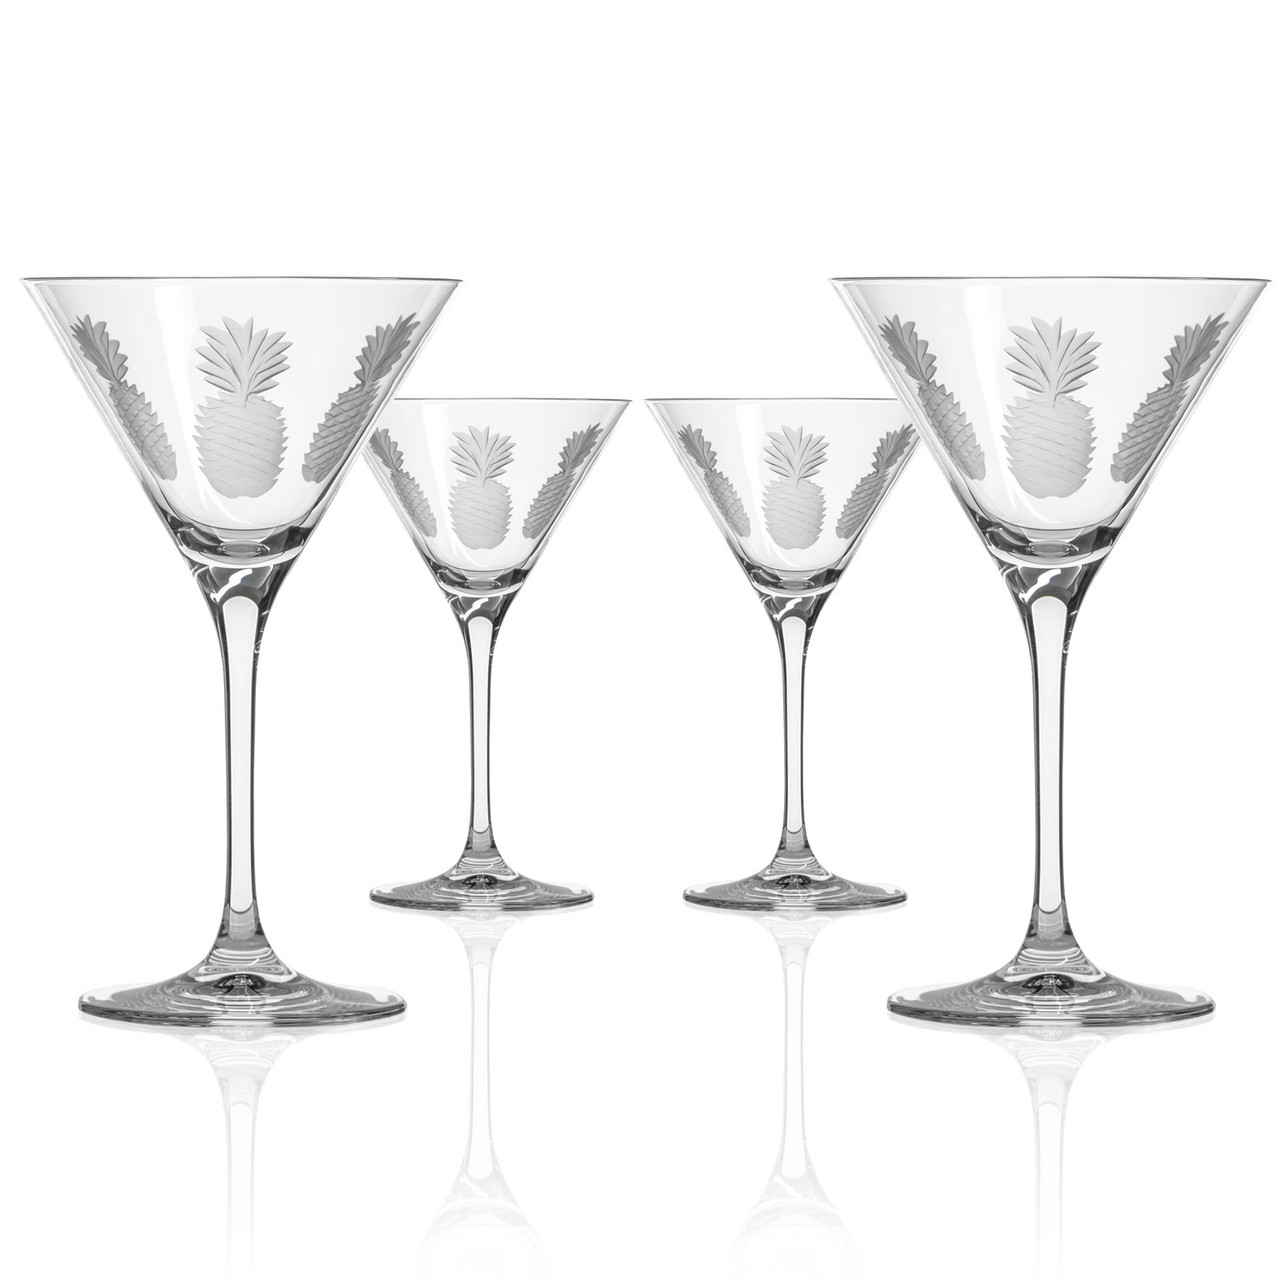 Cocktail Cup tropical bar glasses Martini Glasses Chiller Cocktail Cup